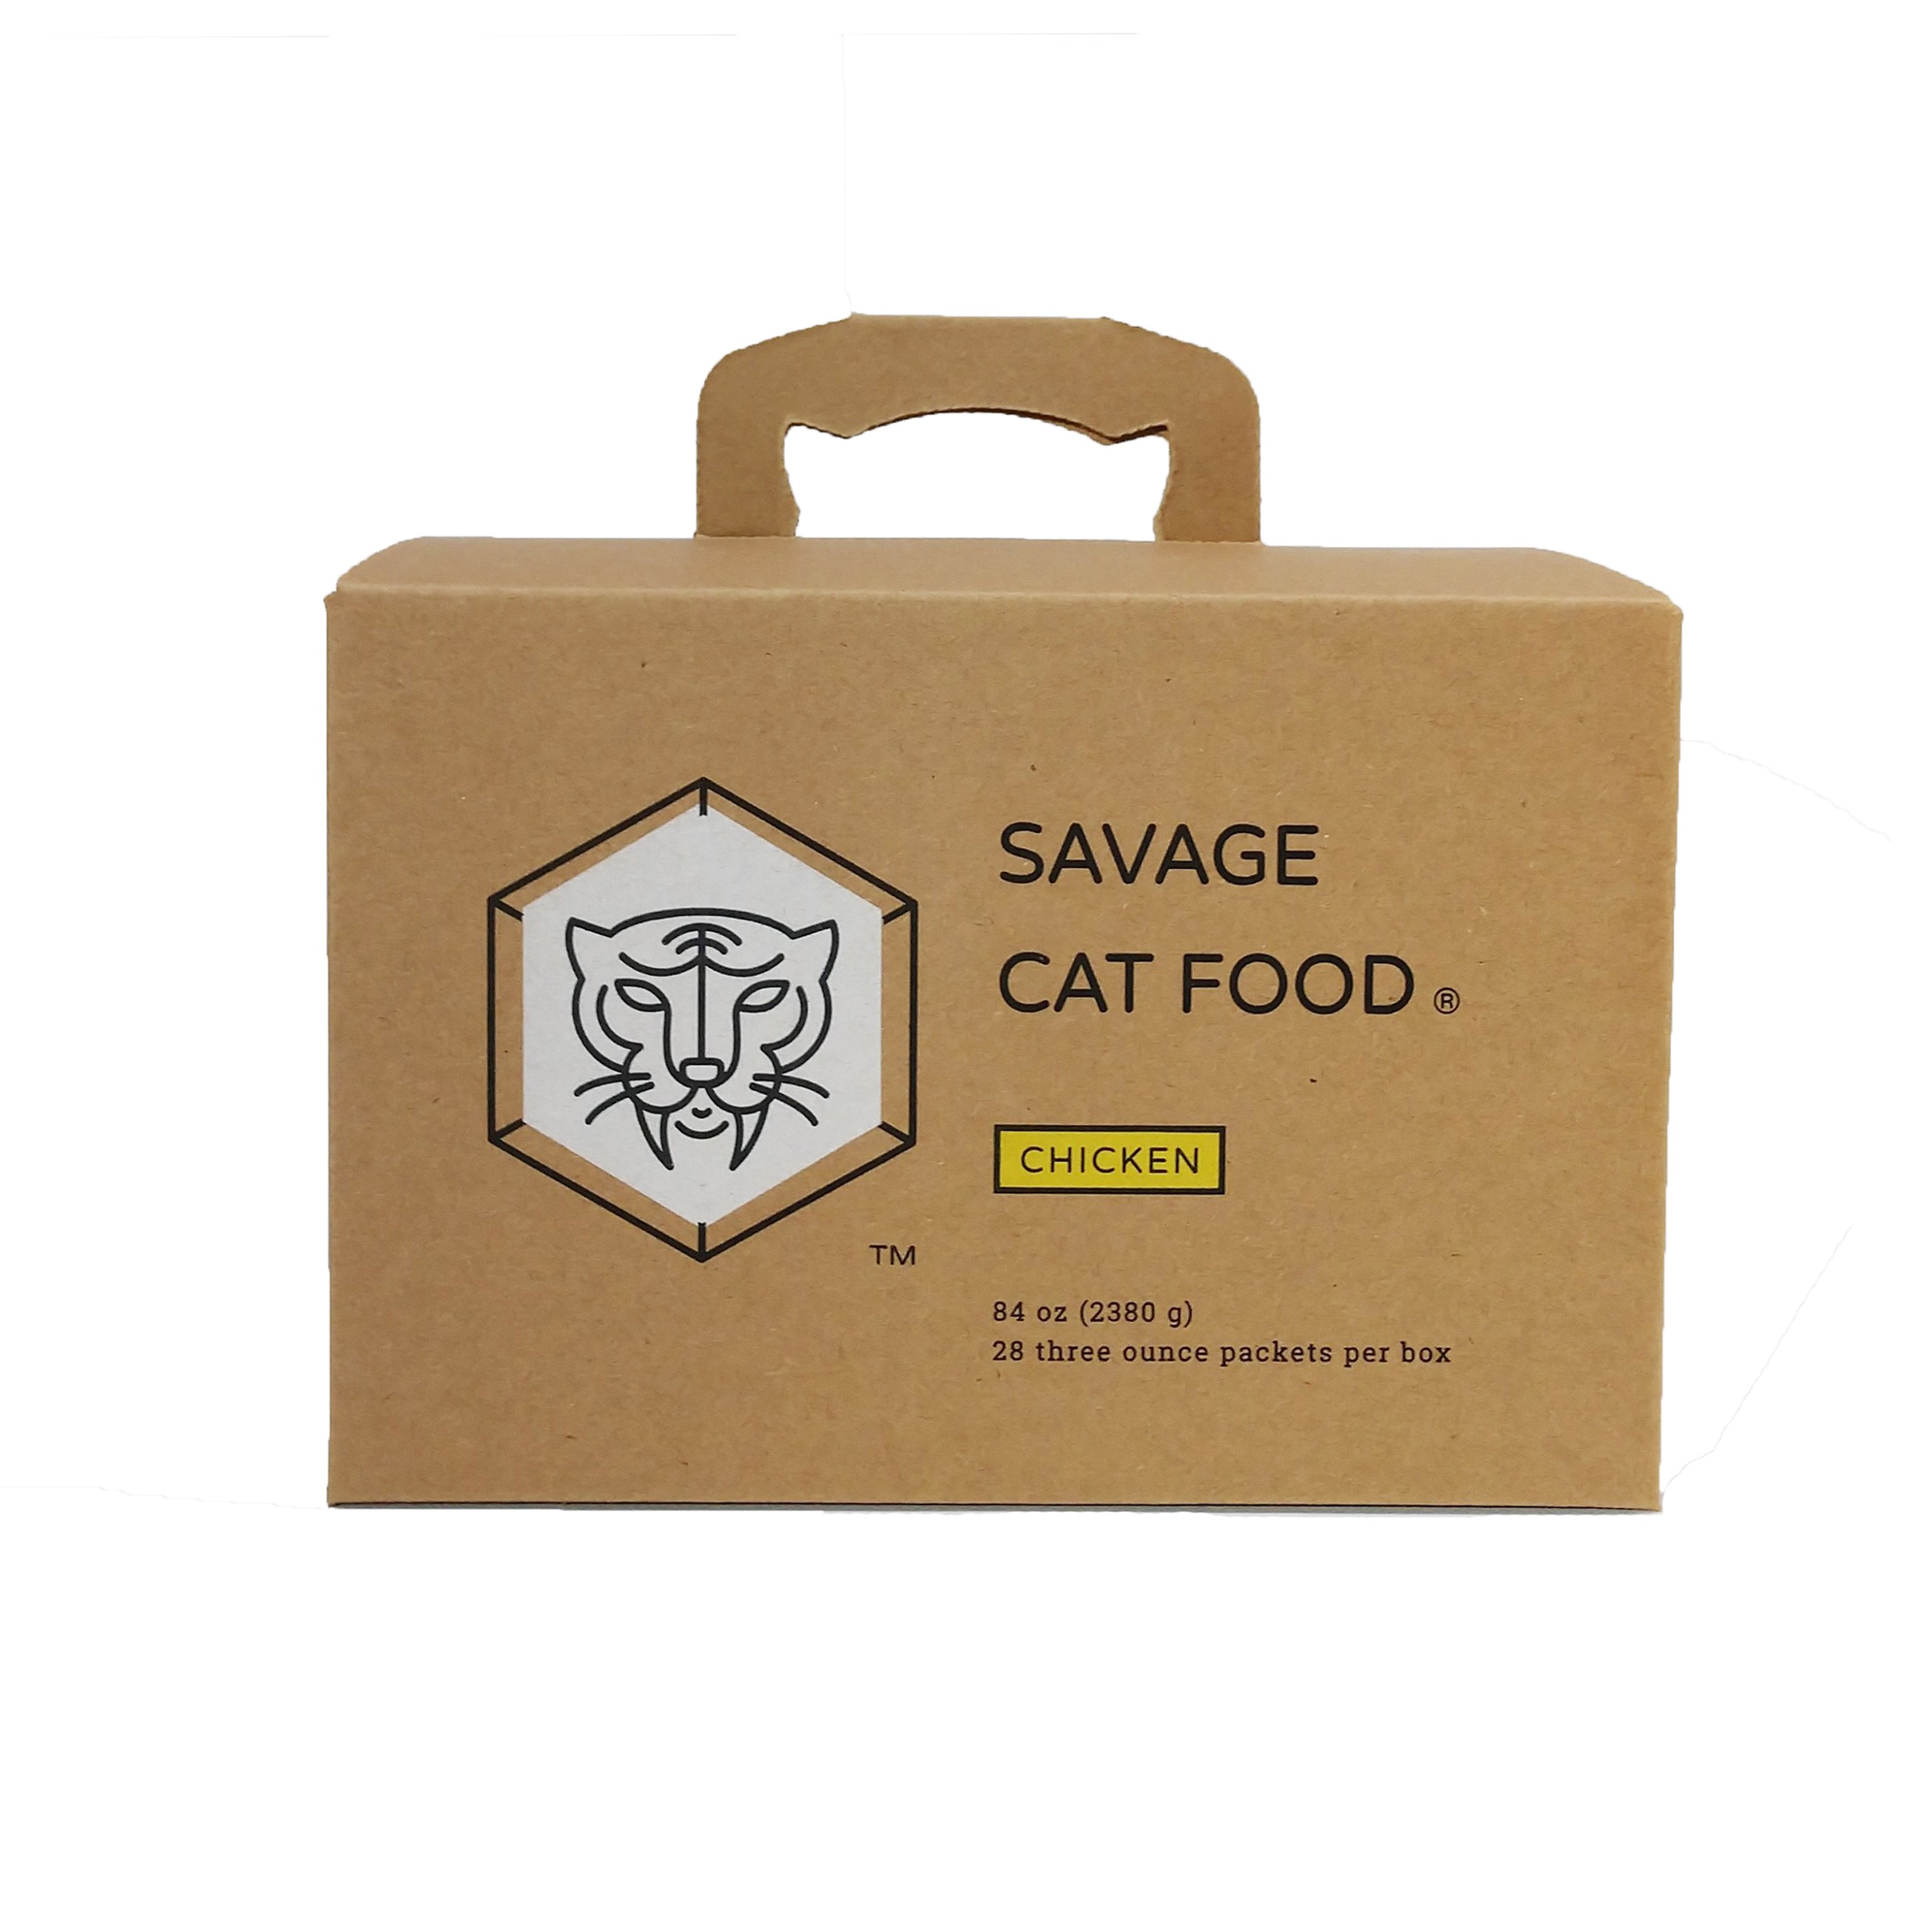 Savage Cat Food Reviews Get All The Details At Hello Subscription!